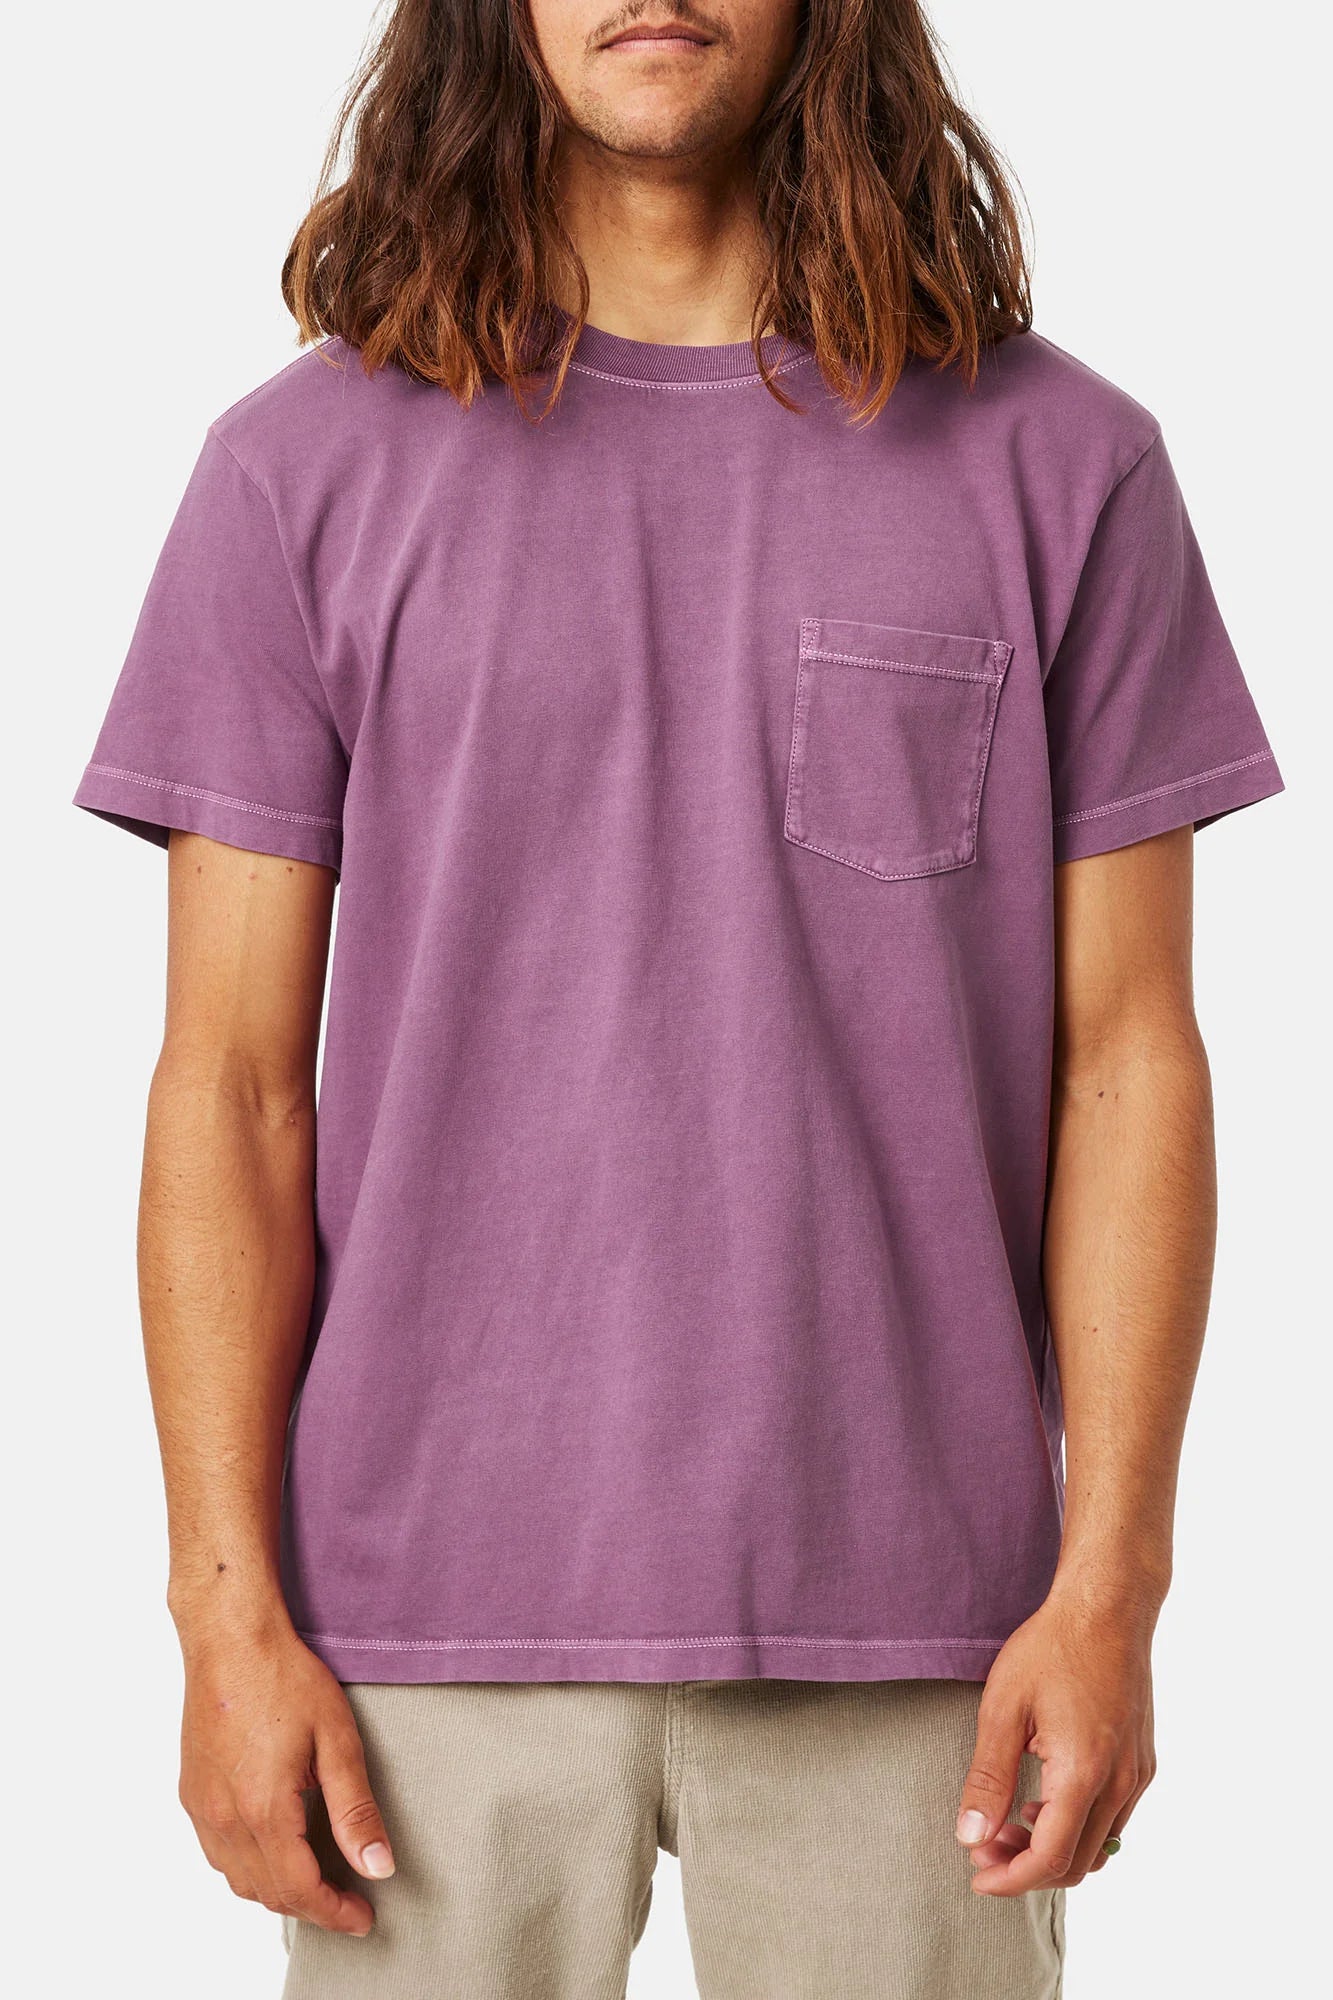 Front view of man wearing a short sleeve pocket tee in the color Kelp Red Sand Wash